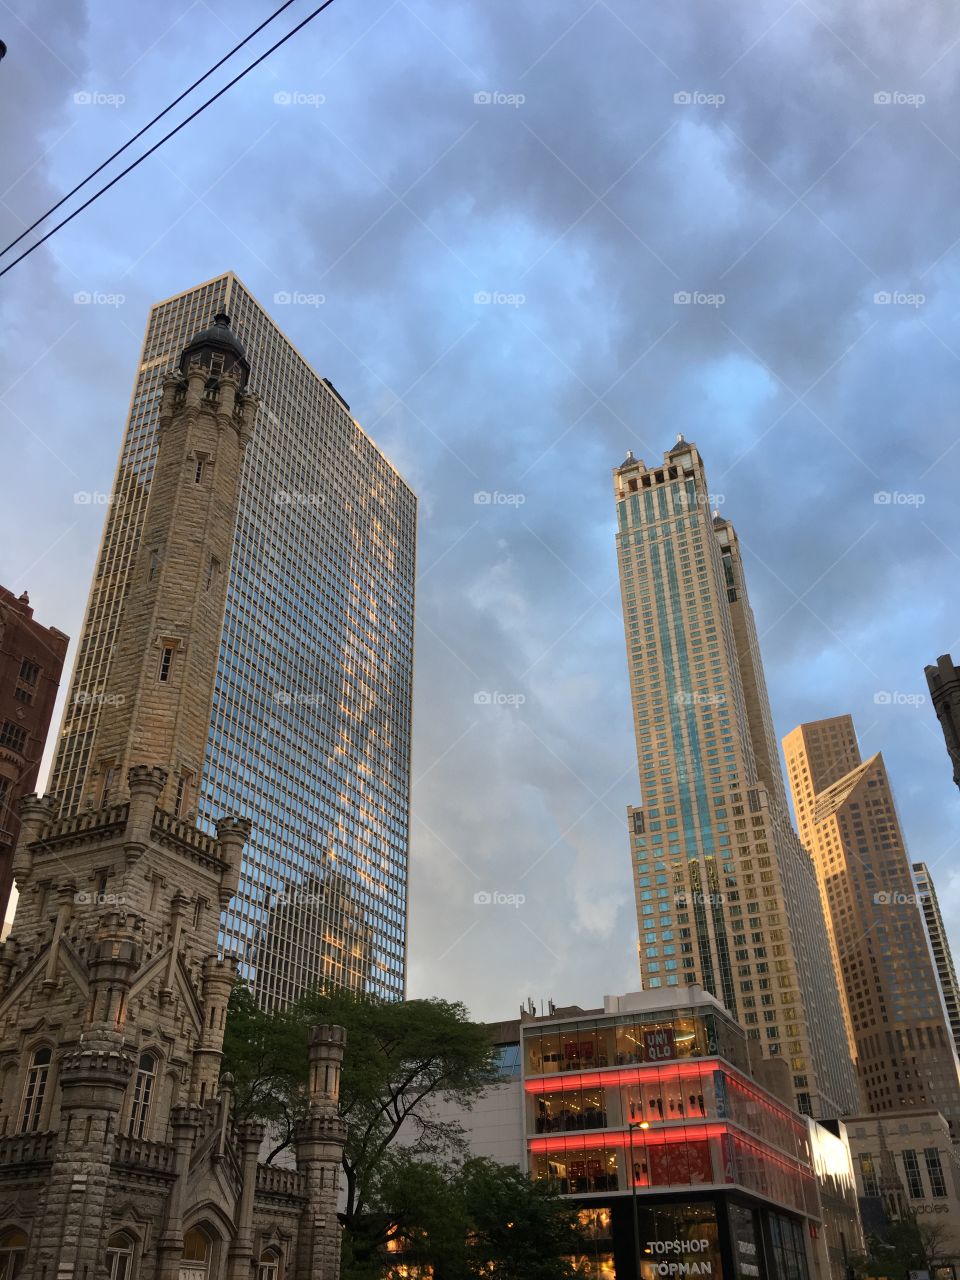 Great Chicago Fire survivor tower on lower left surrounded by urban buildings